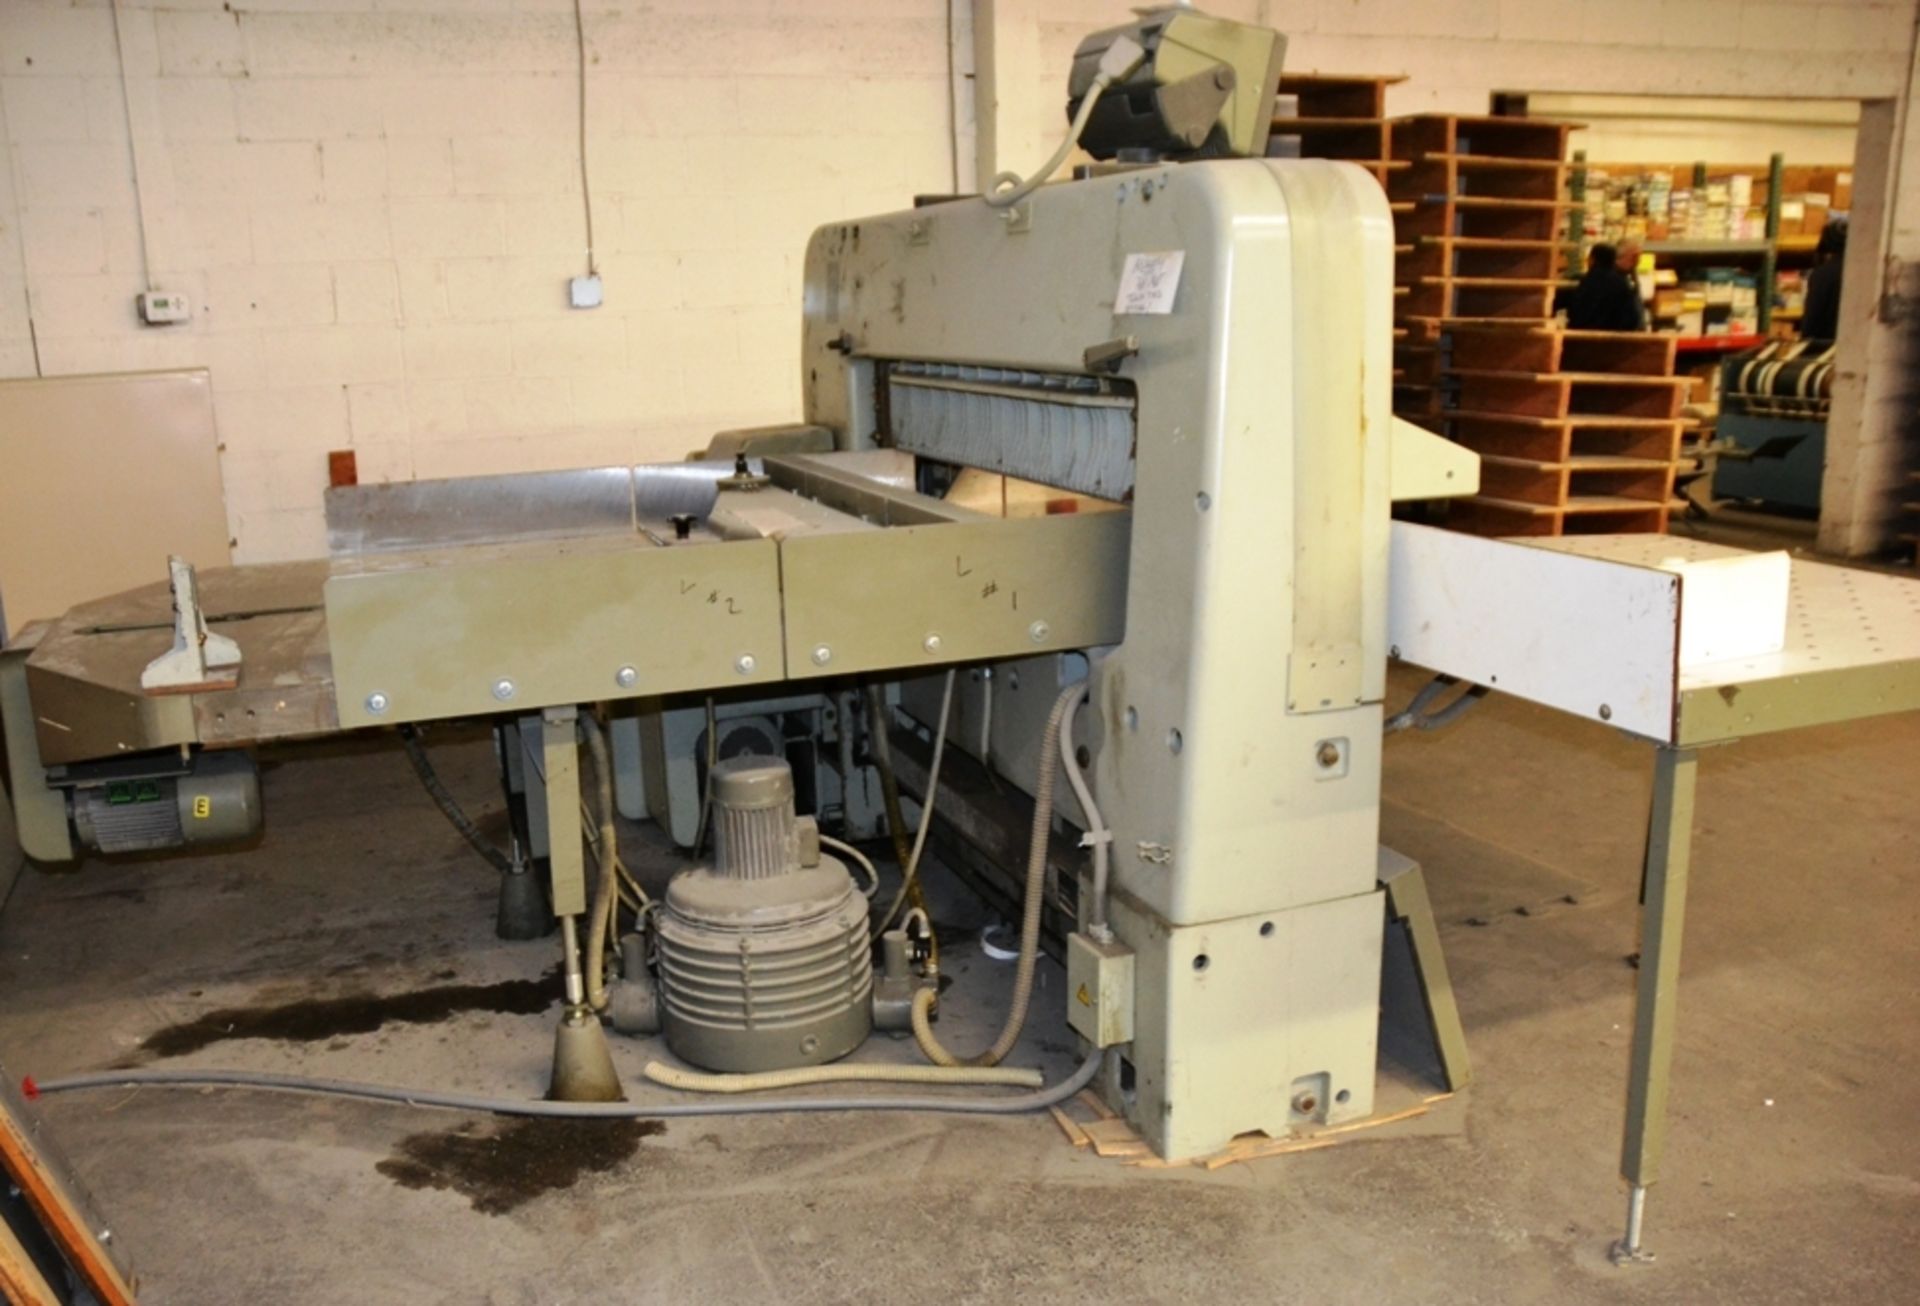 Polar Mohr 54" Power Paper Cutter, Model 137EMC-Mon, S/N 6341217, Airt Tables Throughout, Eletric - Image 2 of 2